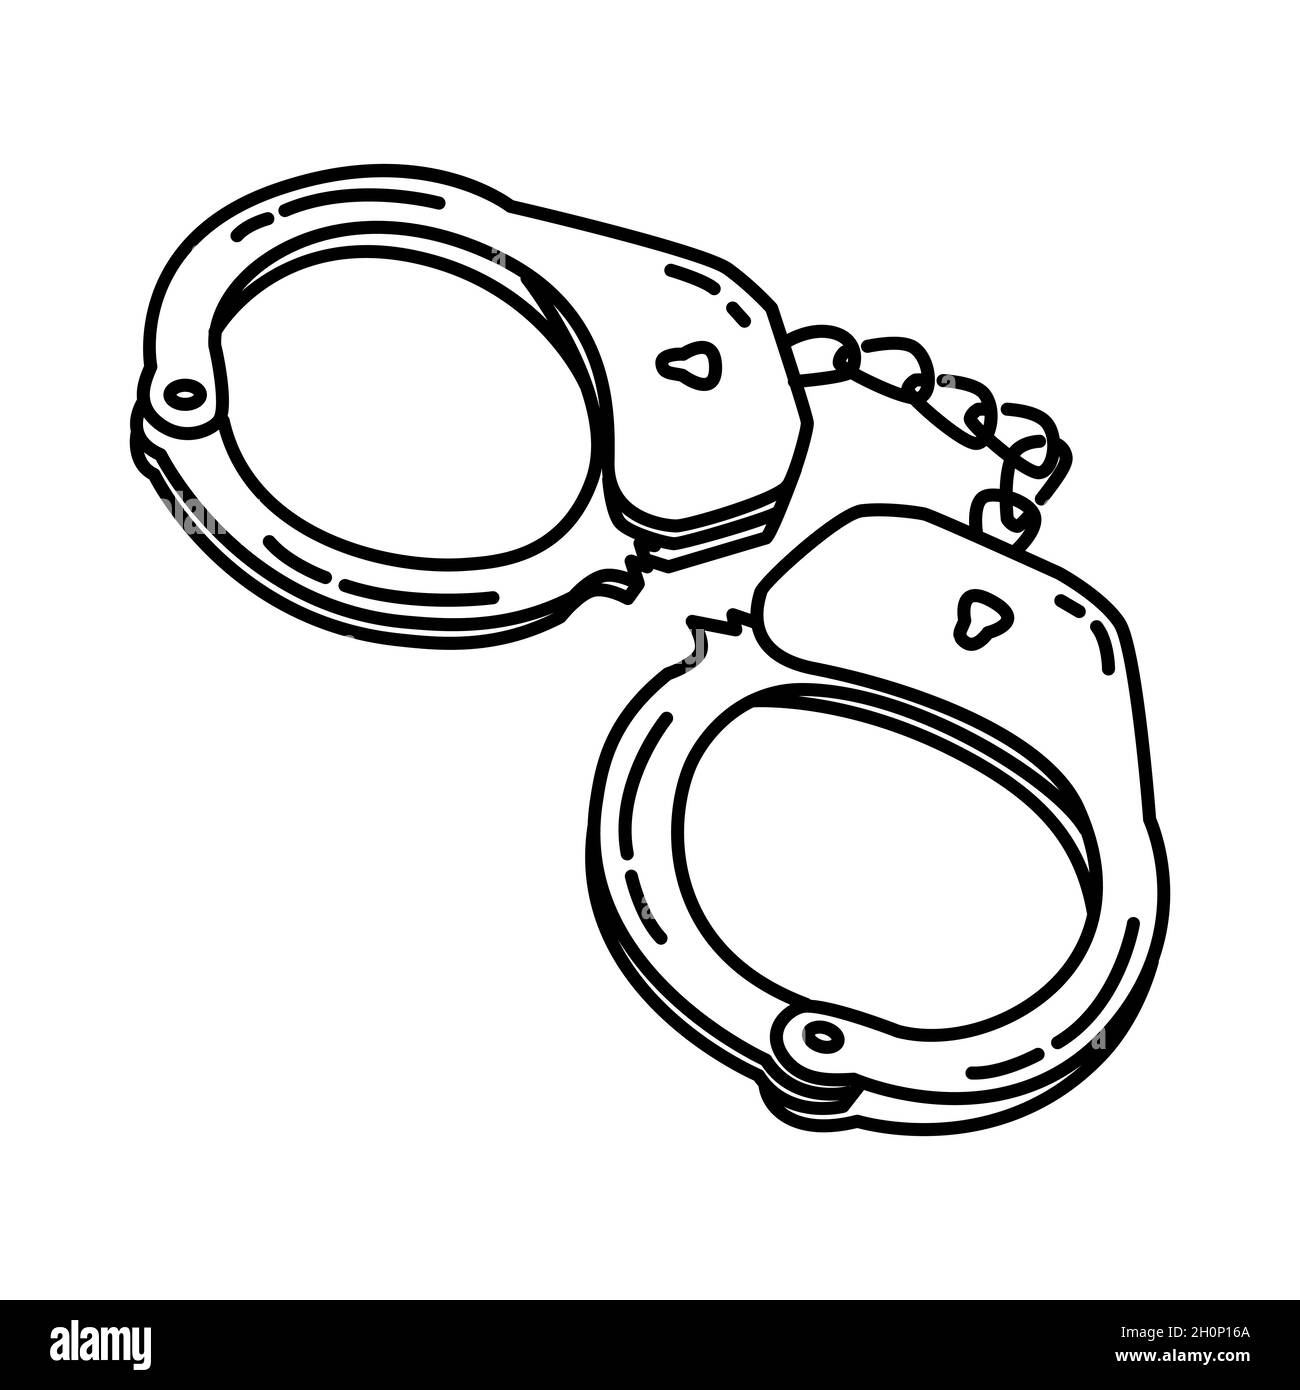 Handcuffs Part of Police Equipment and Accessories Hand Drawn Icon Set Vector. Stock Vector